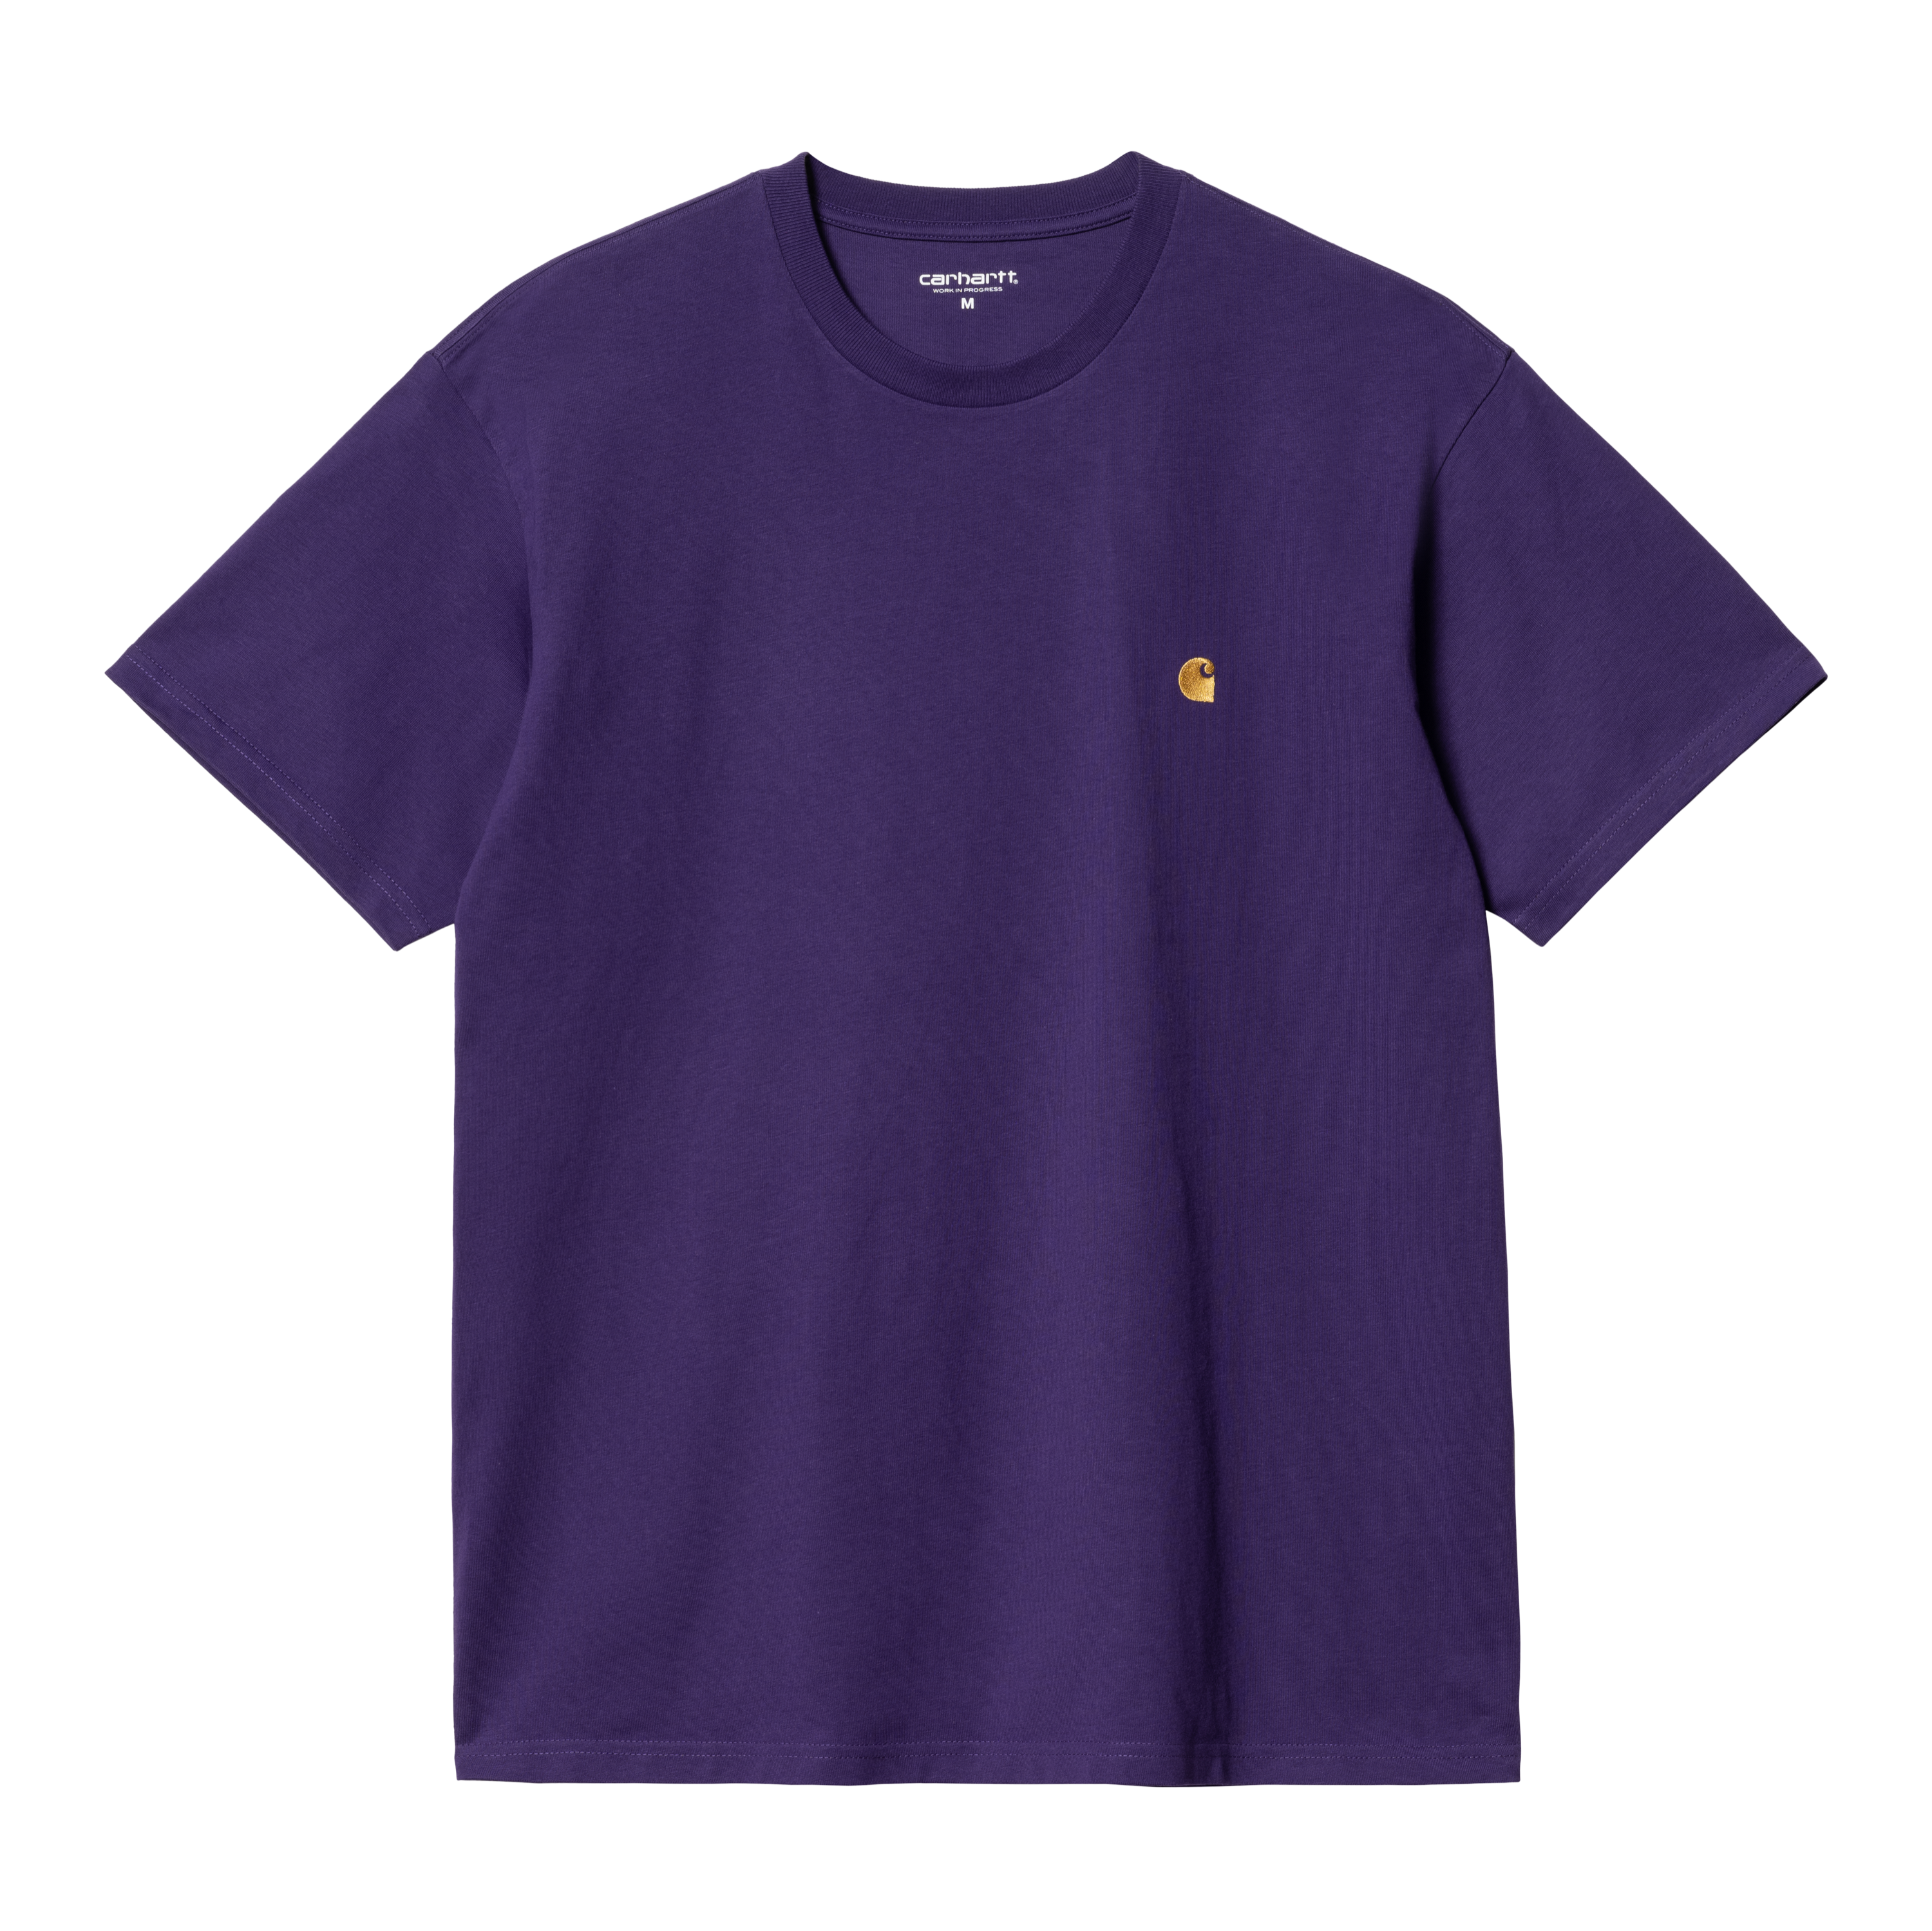 Carhartt WIP - CHASE T-SHIRT - Tyrian/Gold